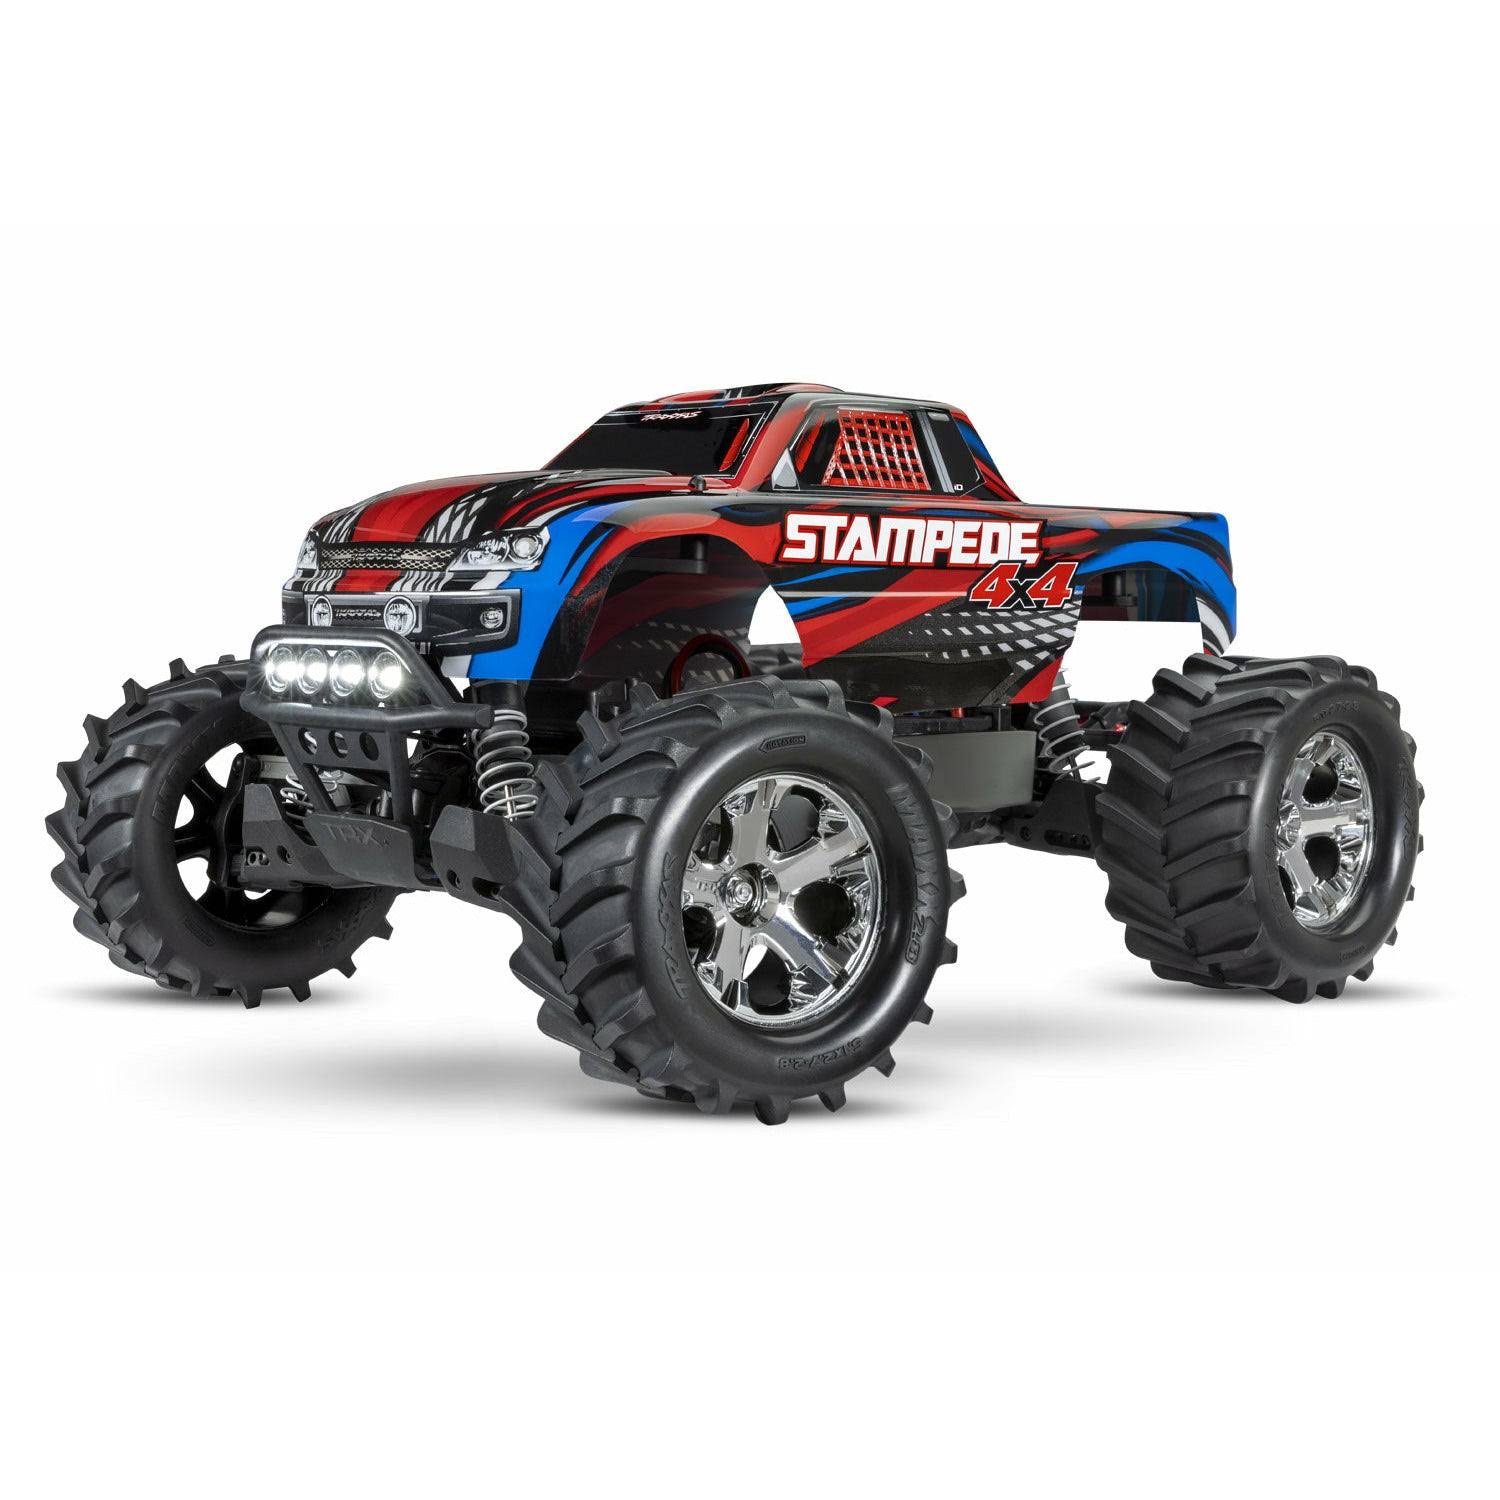 Traxxas Stampede 4x4 LCG 1/10 RTR Monster Truck (Red) w/LED Lights